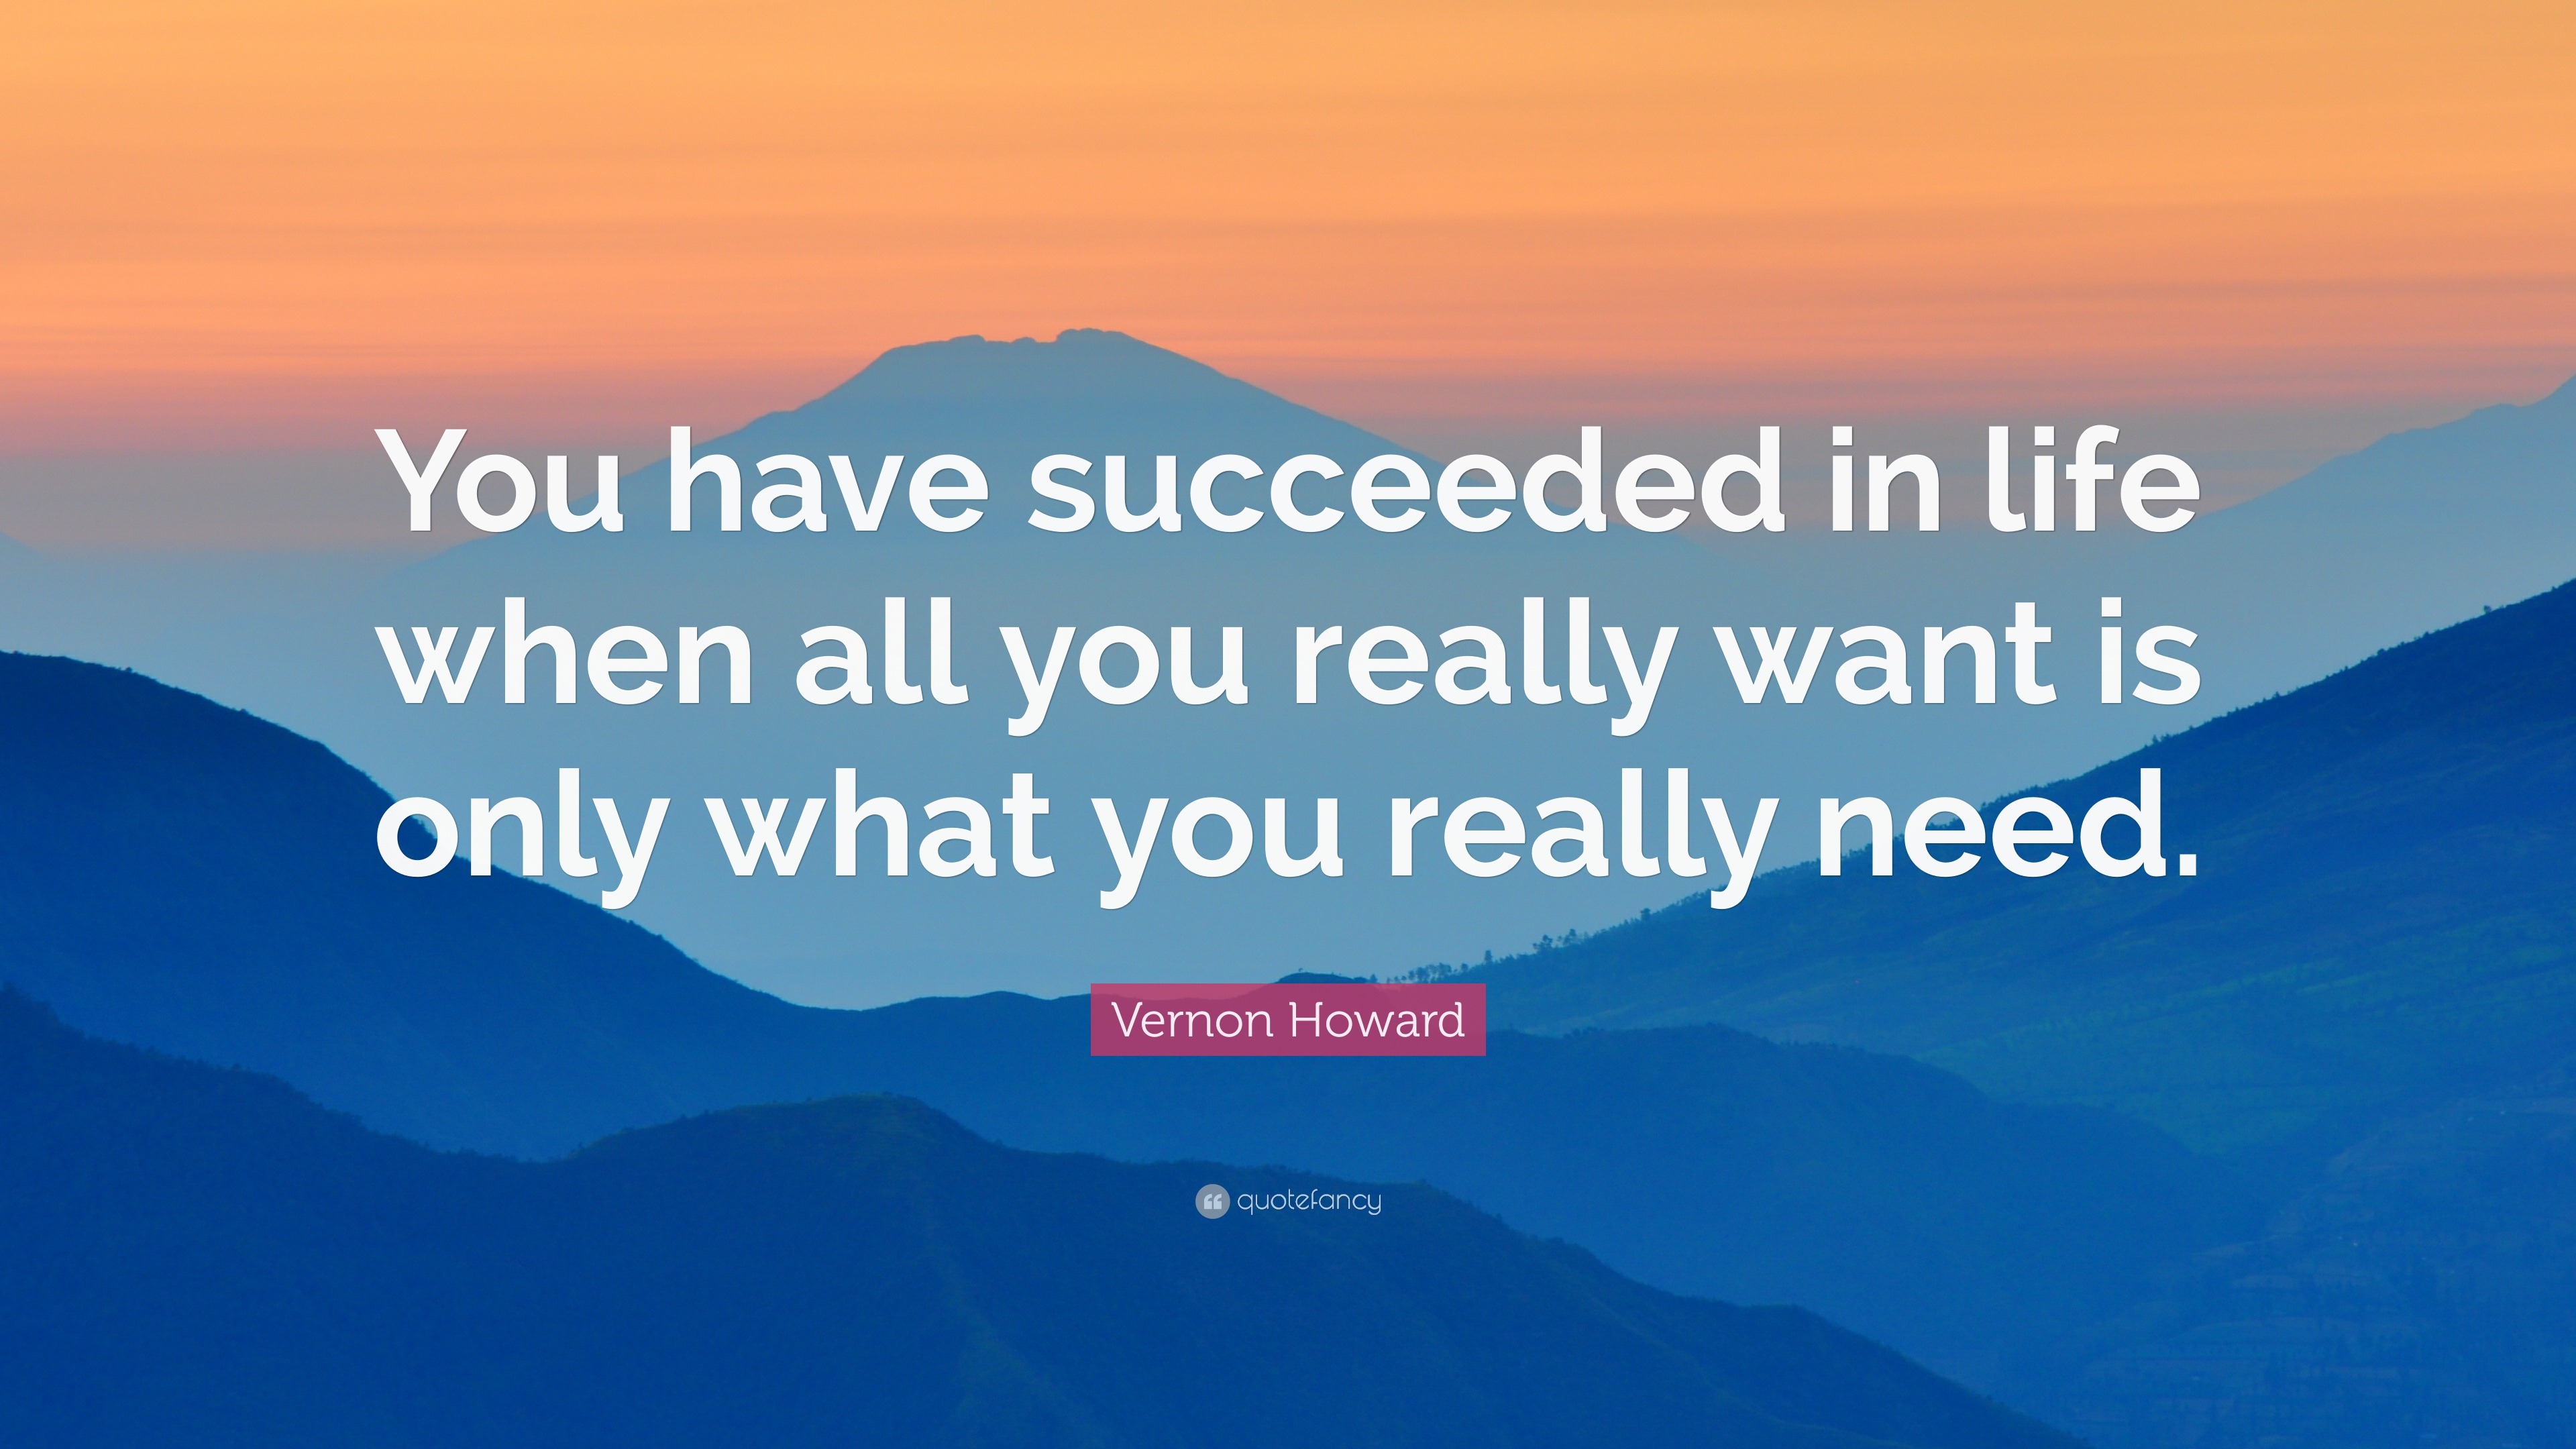 Vernon Howard Quote: “You have succeeded in life when all you really ...